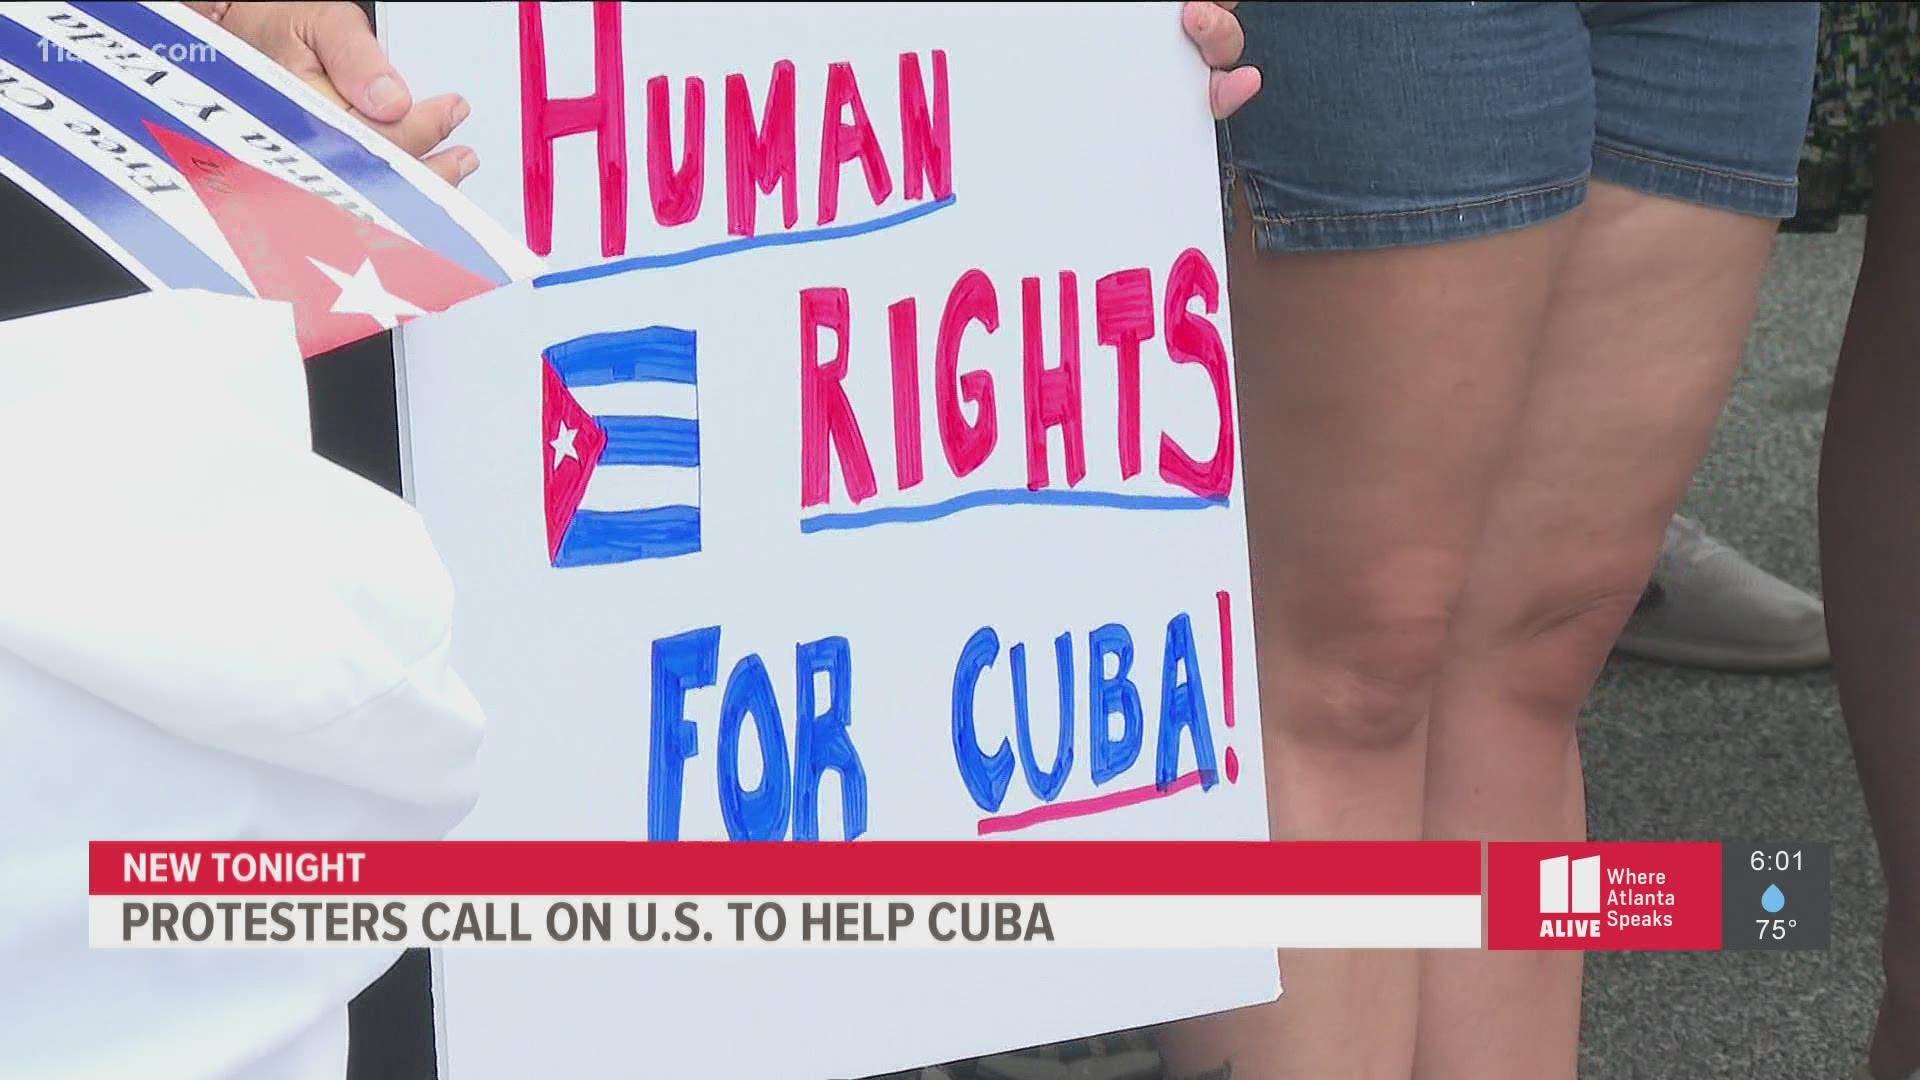 On Sunday, crowds gathered in Sandy Springs to call on the American government to help Cubans who are suffering from an economic crisis in the country.